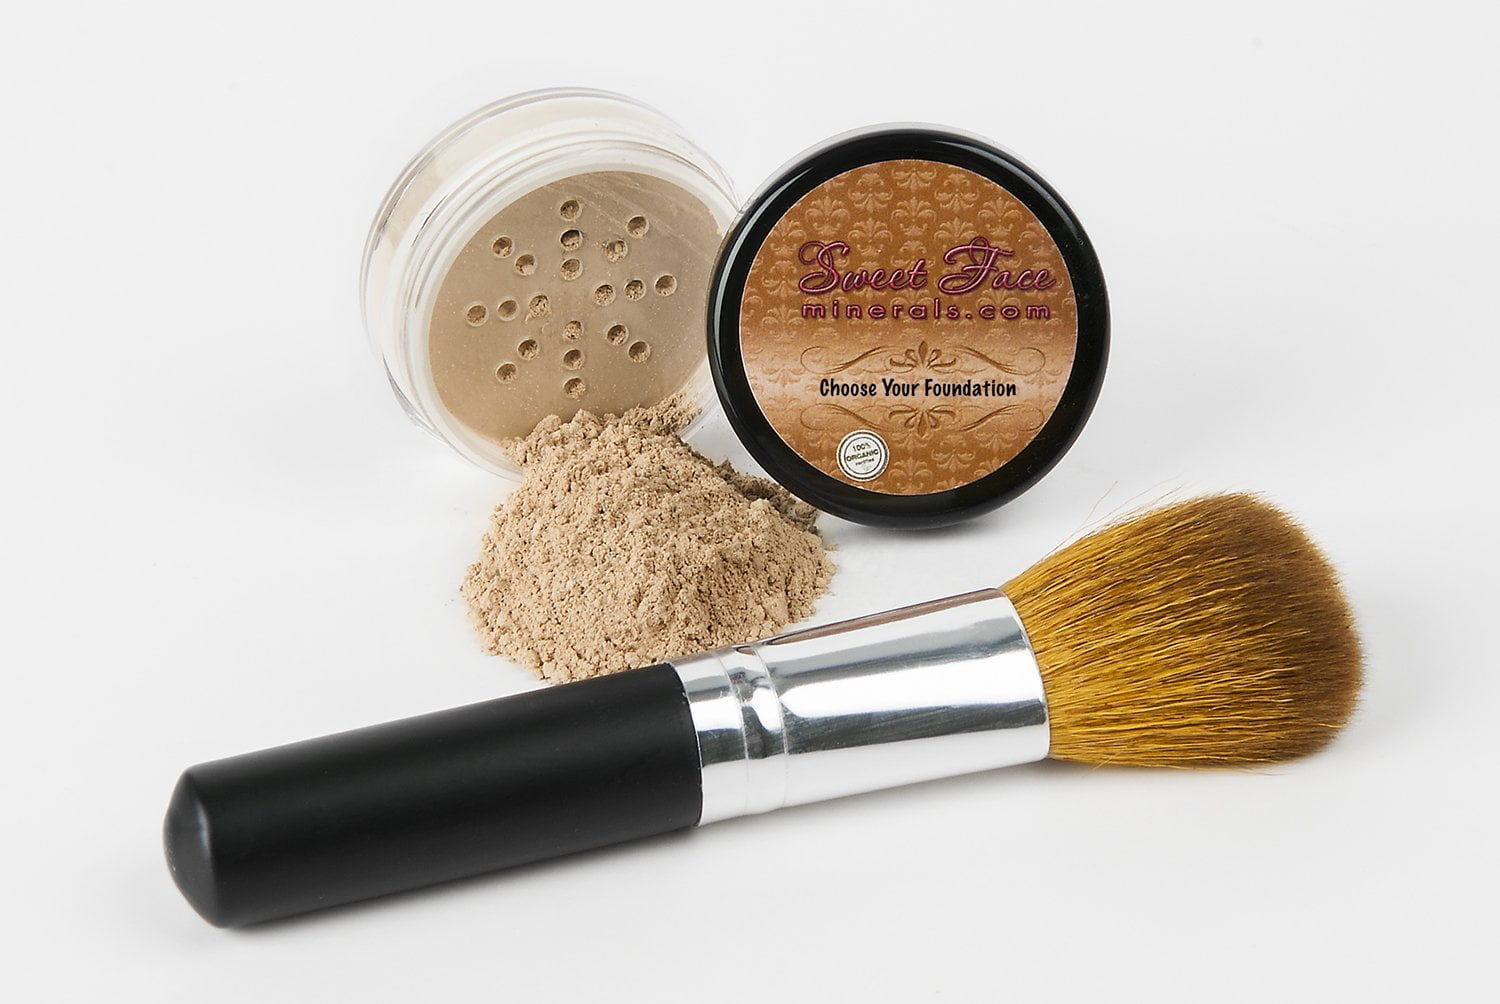 EVERYDAY KIT with BRUSH SET Mineral Makeup Bare Face Matte Powder Foundation 